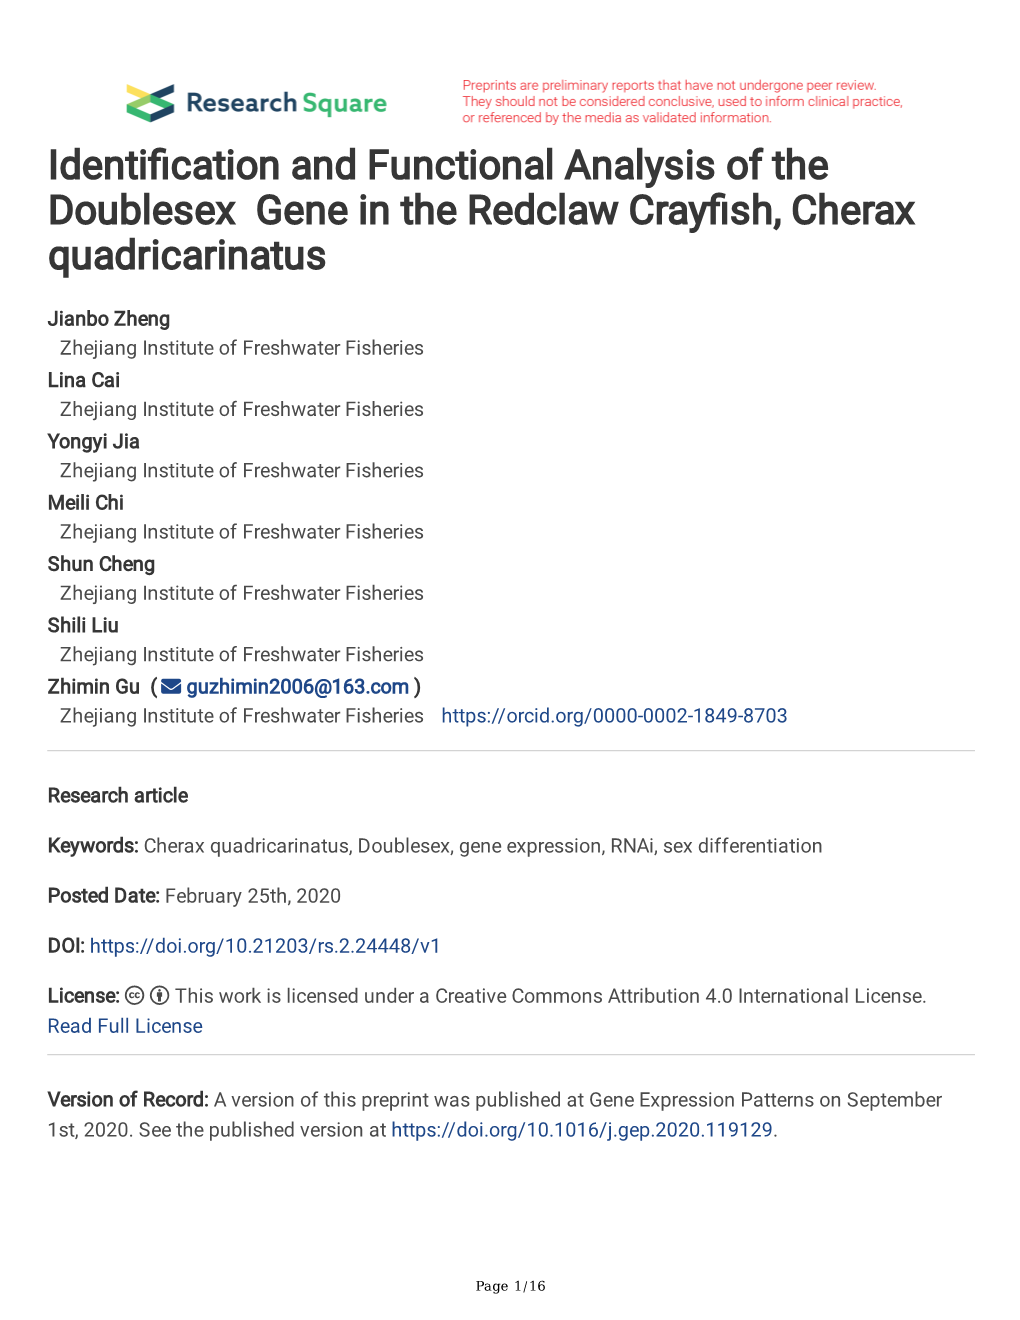 Identification and Functional Analysis of the Doublesex Gene in The